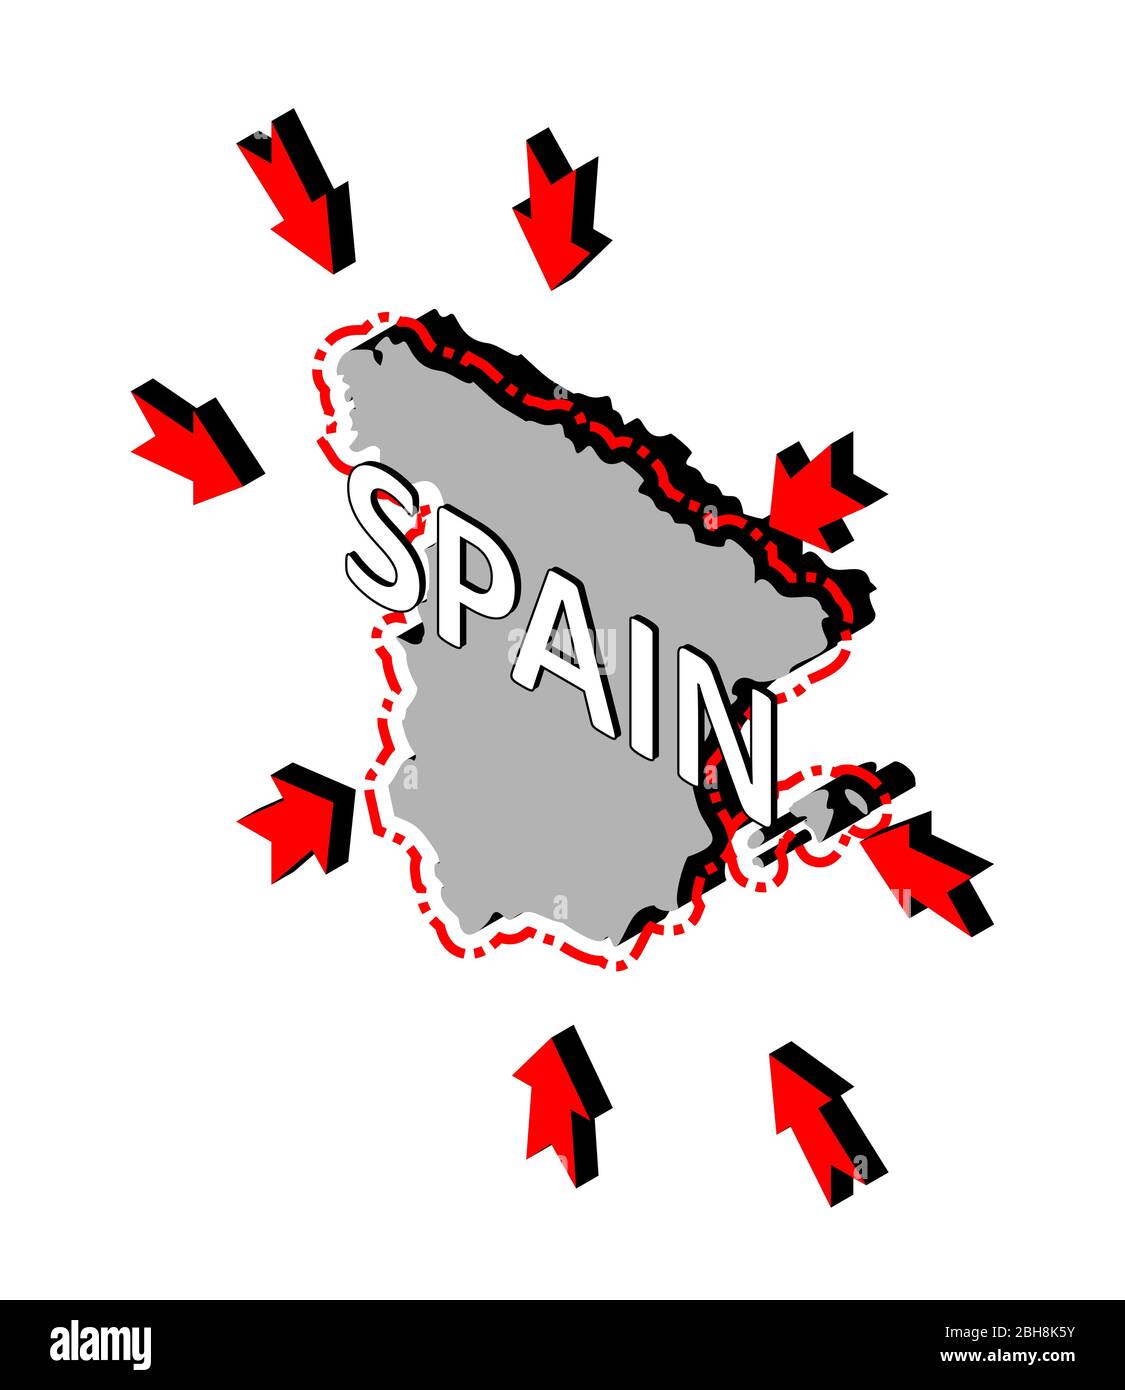 Spain closes borders, quarantine, protection against coronavirus. Ban on crossing borders. Vector isometric image of Spain map with arrows around. A t Stock Vector